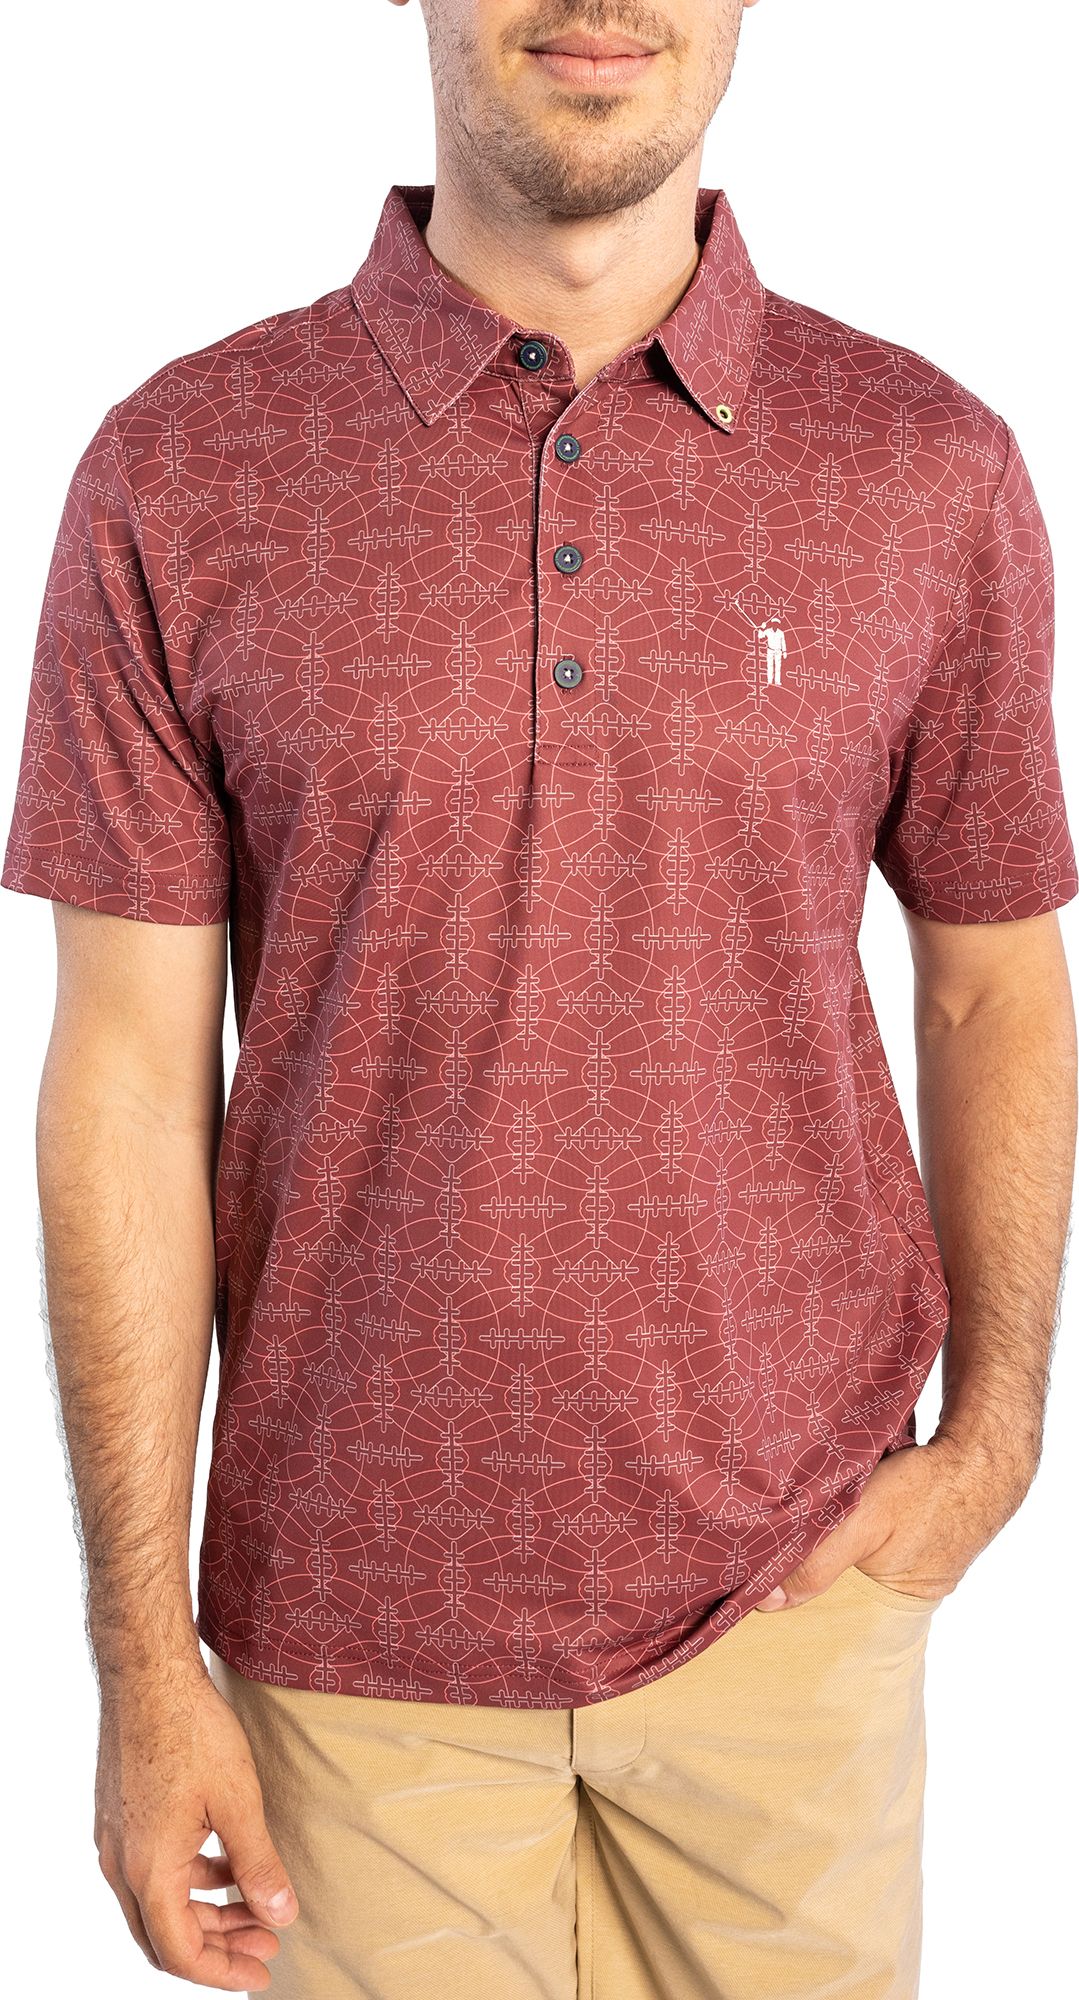 William Murray Men's Laces Out Polo